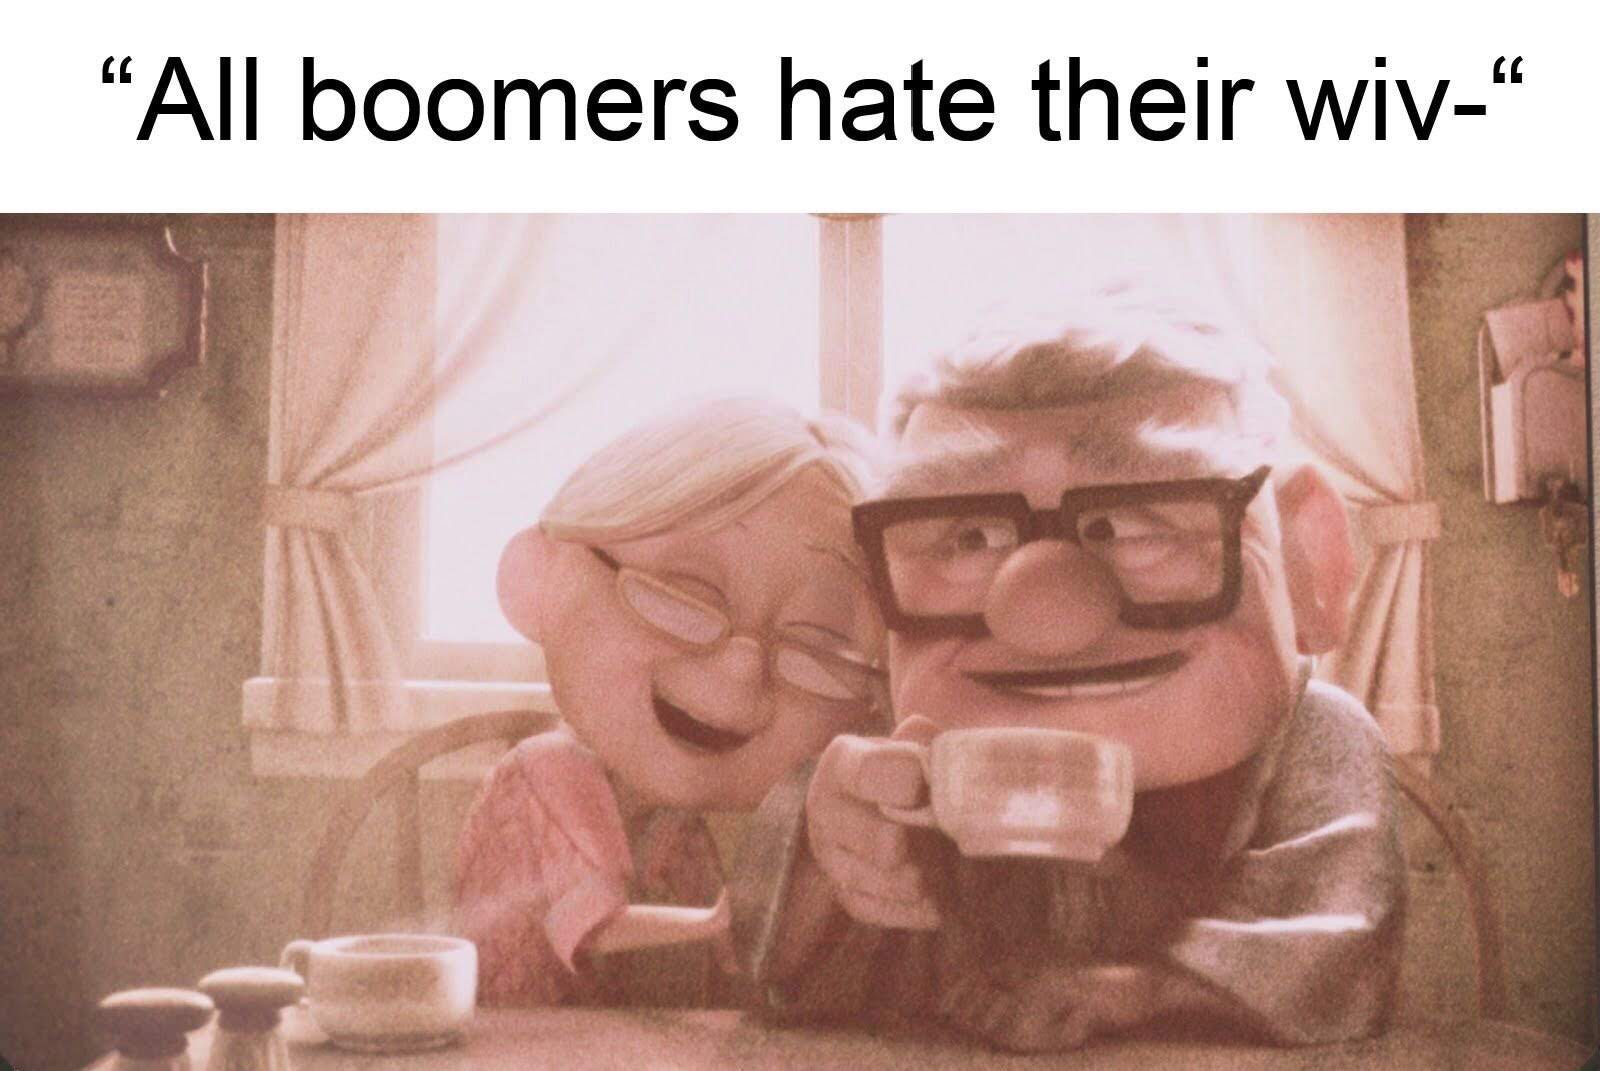 carl and ellie - "All boomers hate their wiv